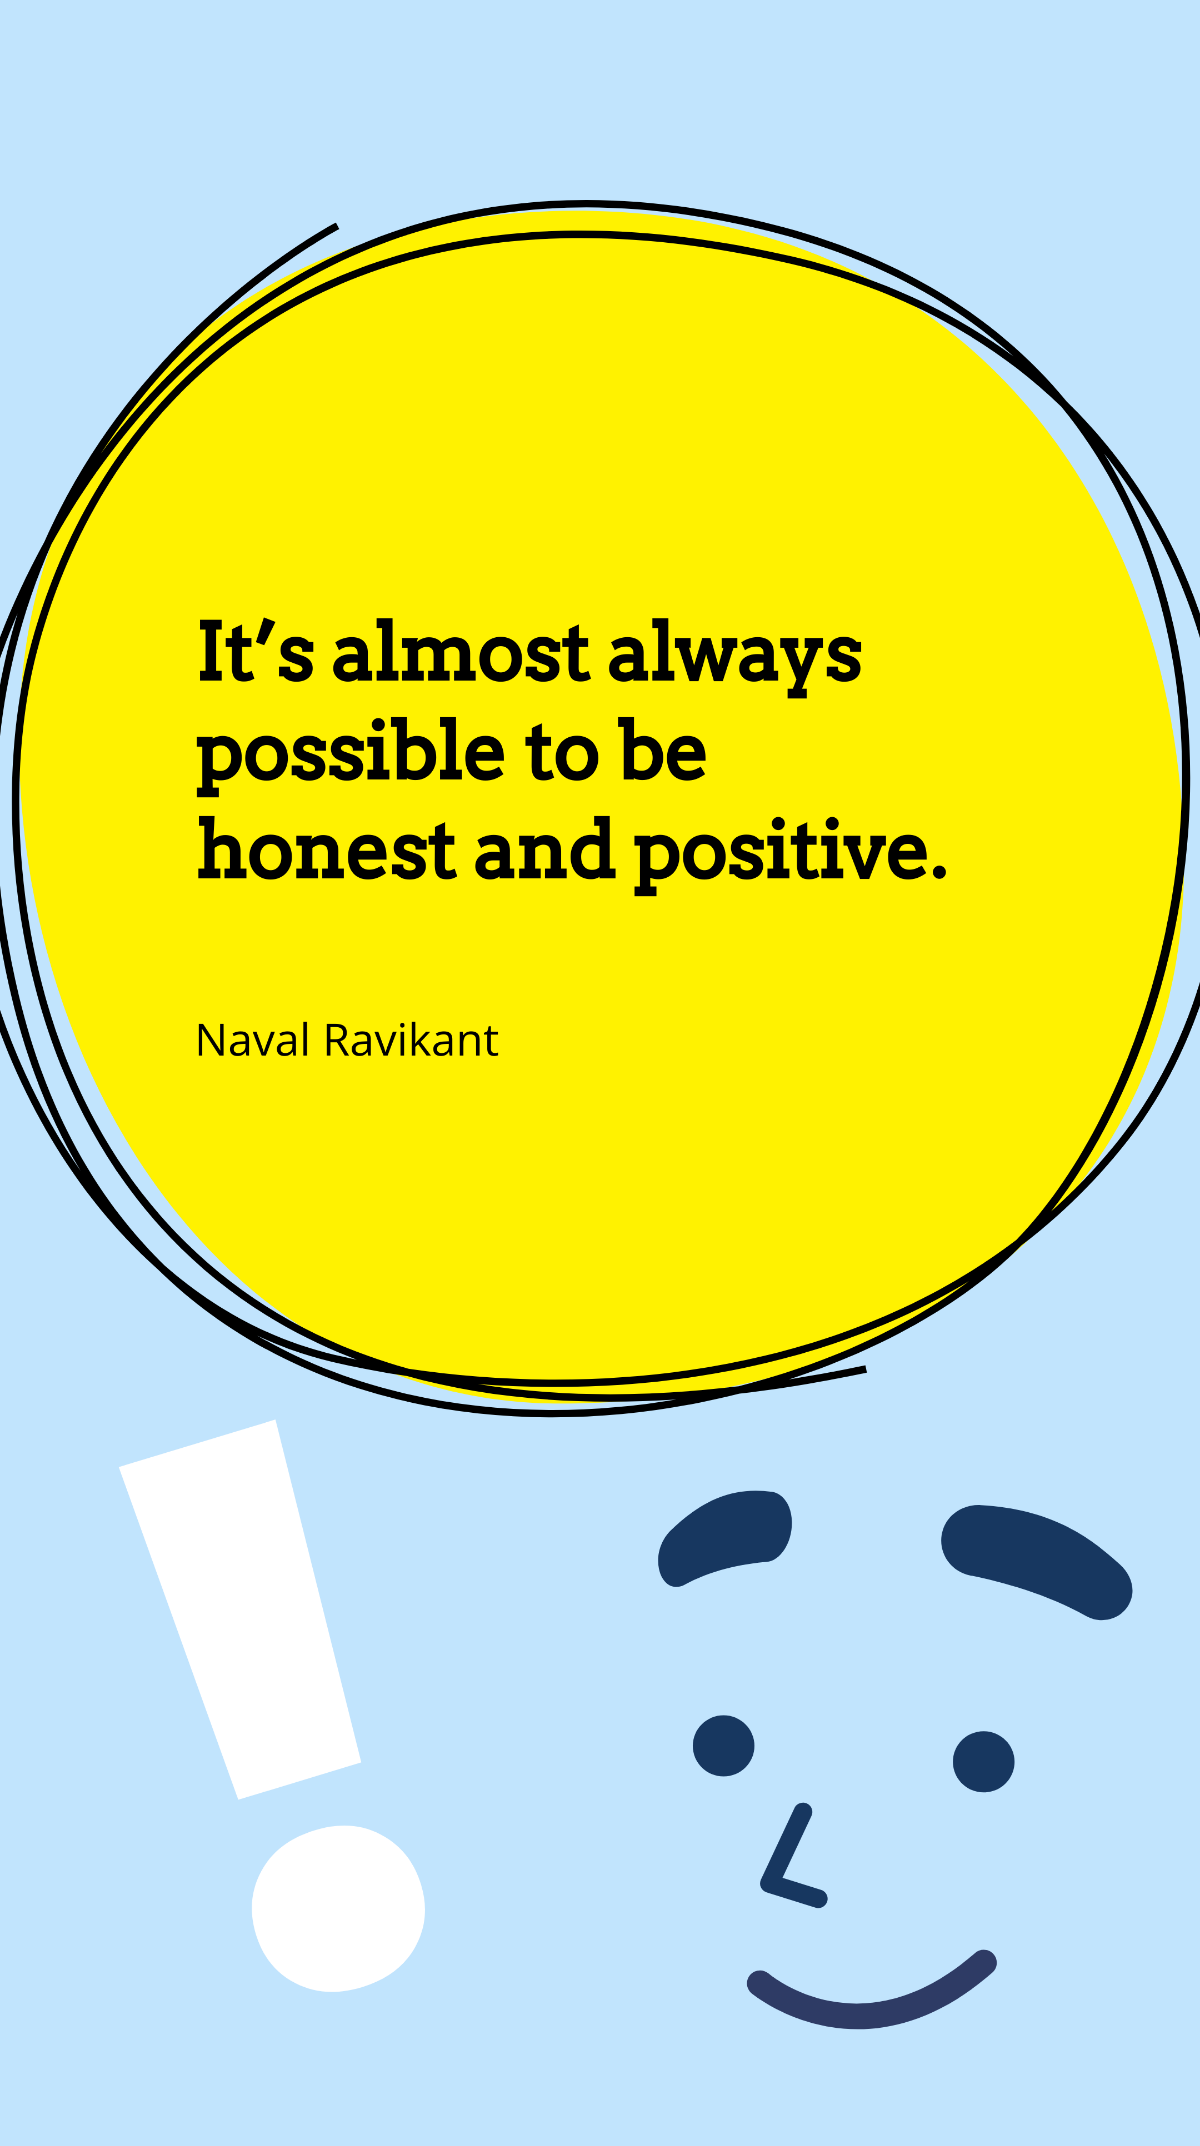 Naval Ravikant - It’s almost always possible to be honest and positive.